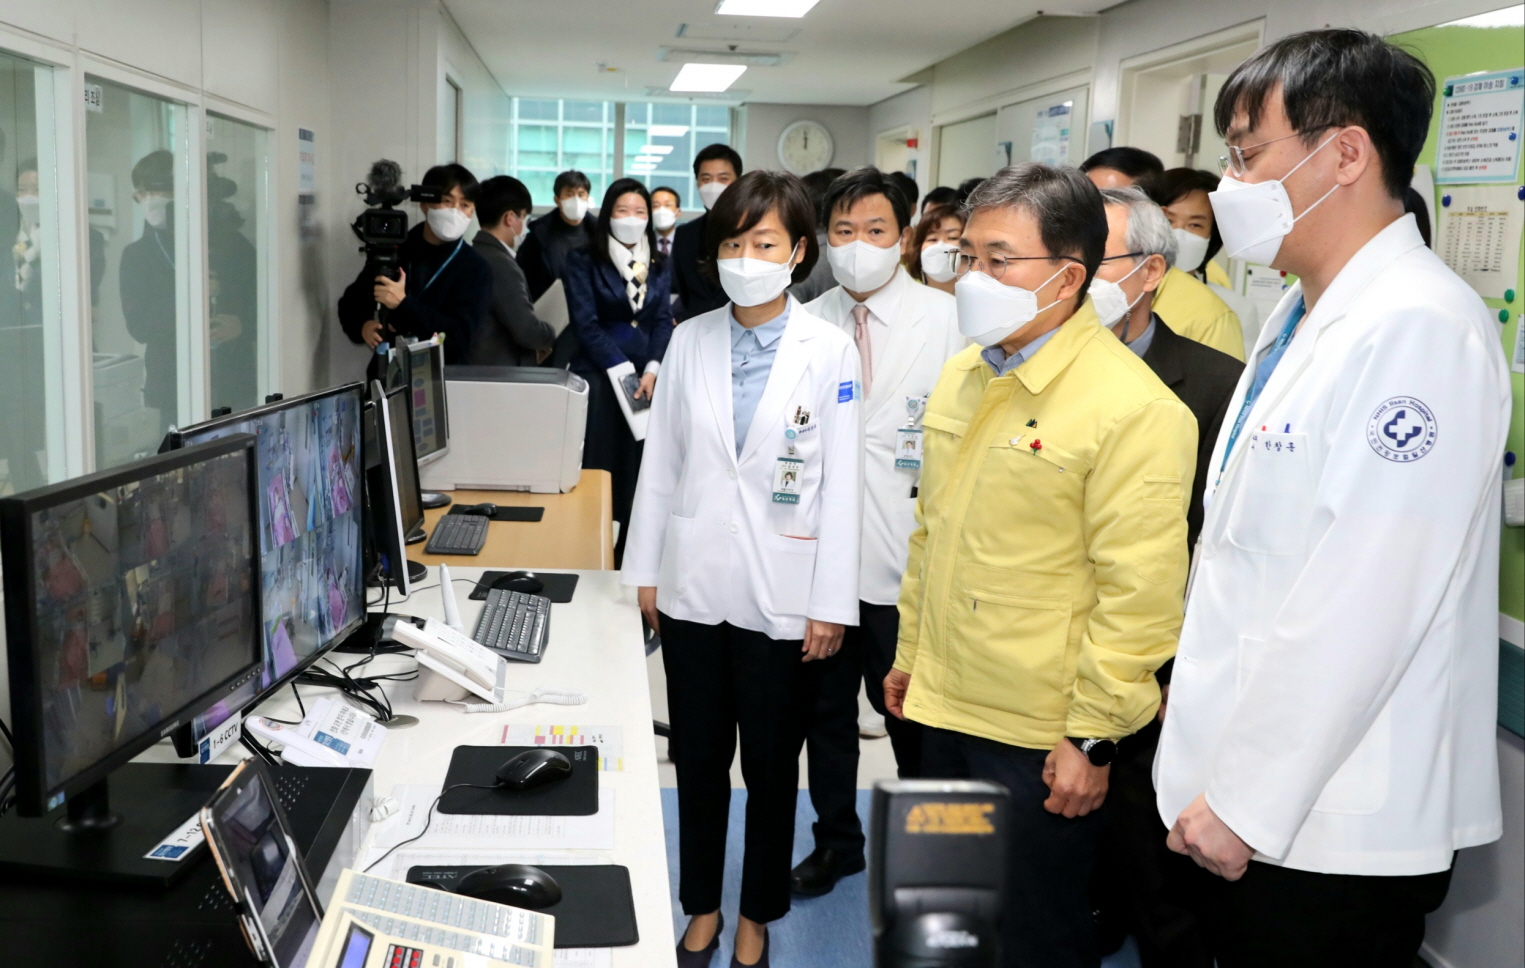 Minister Kwon Checks Hospital Networks in North Gyeonggi for COVID-19 Treatment (January 3) 사진9